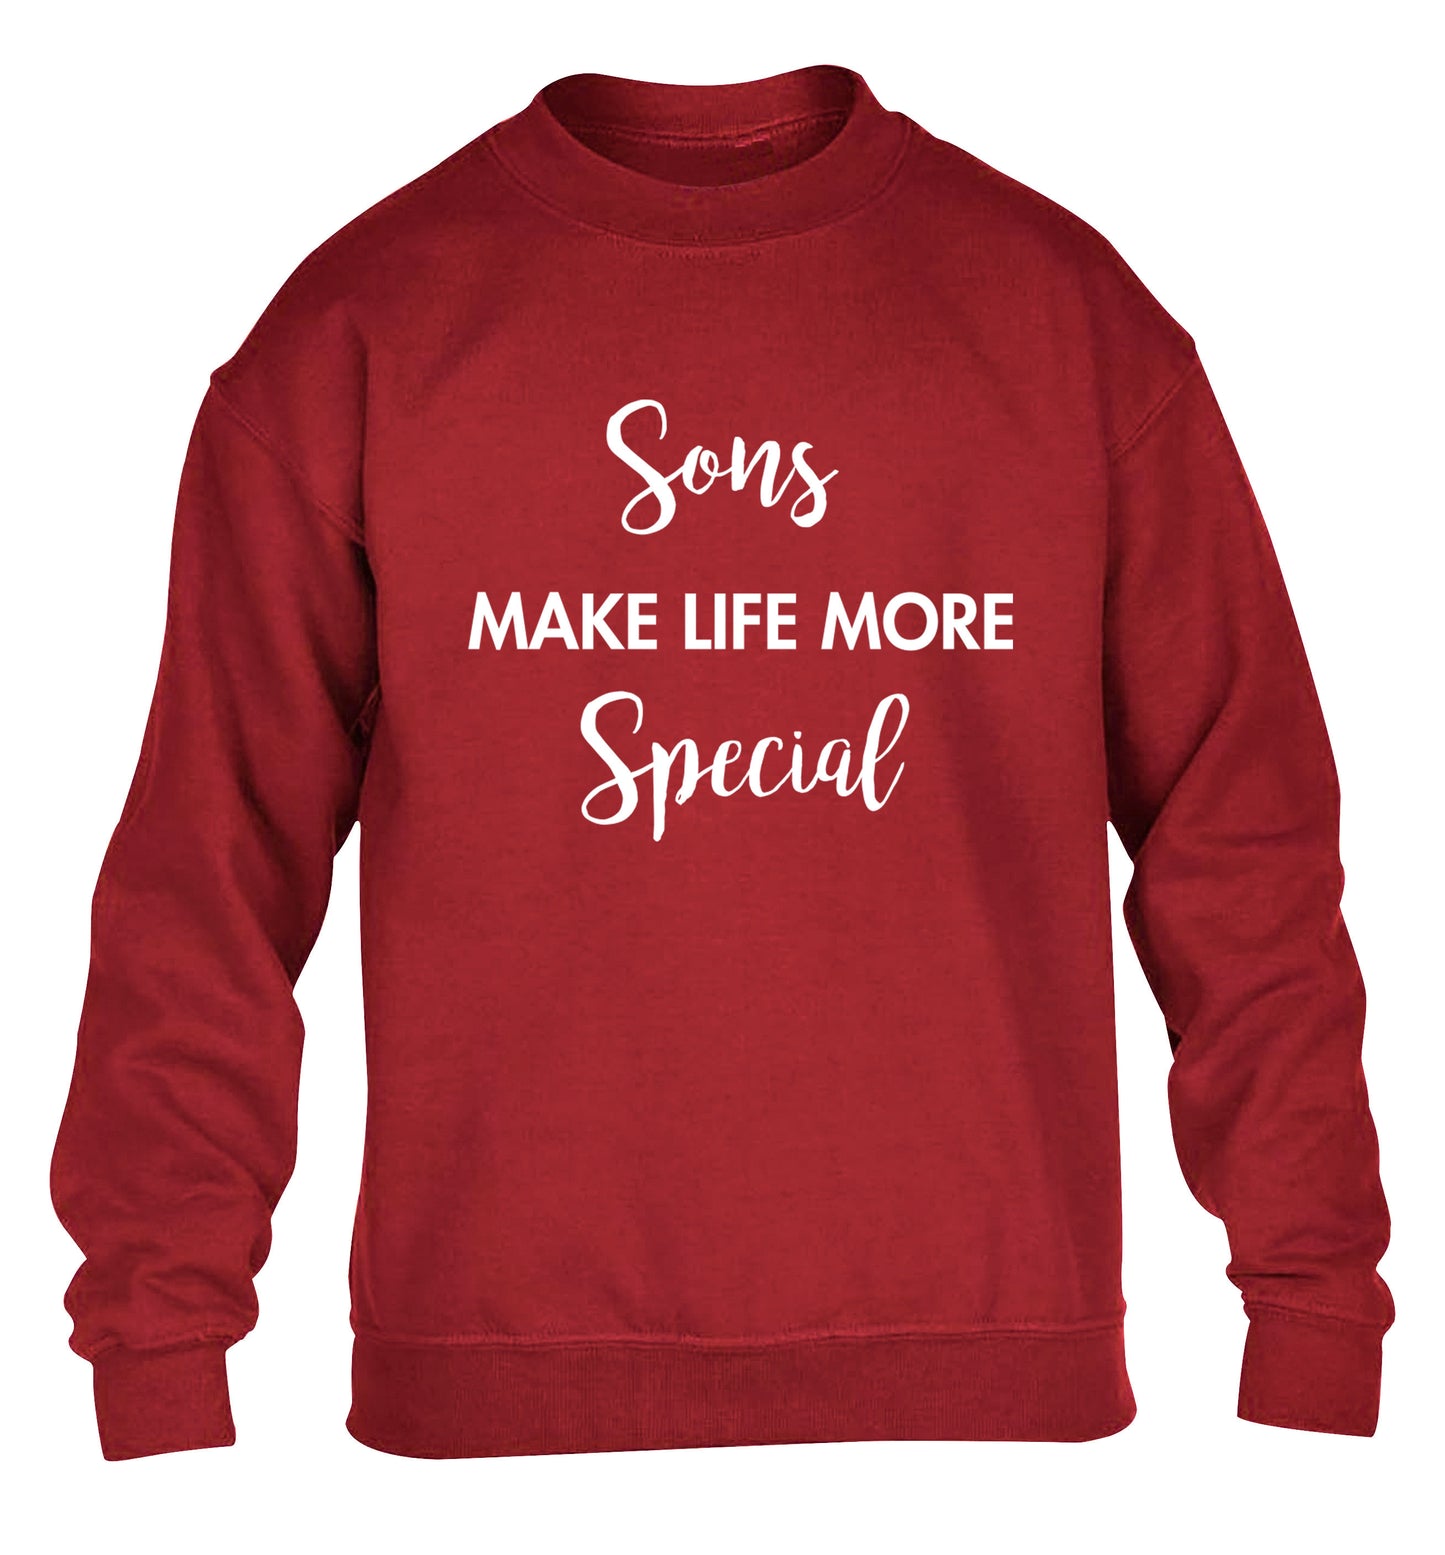 Sons make life more special children's grey sweater 12-14 Years